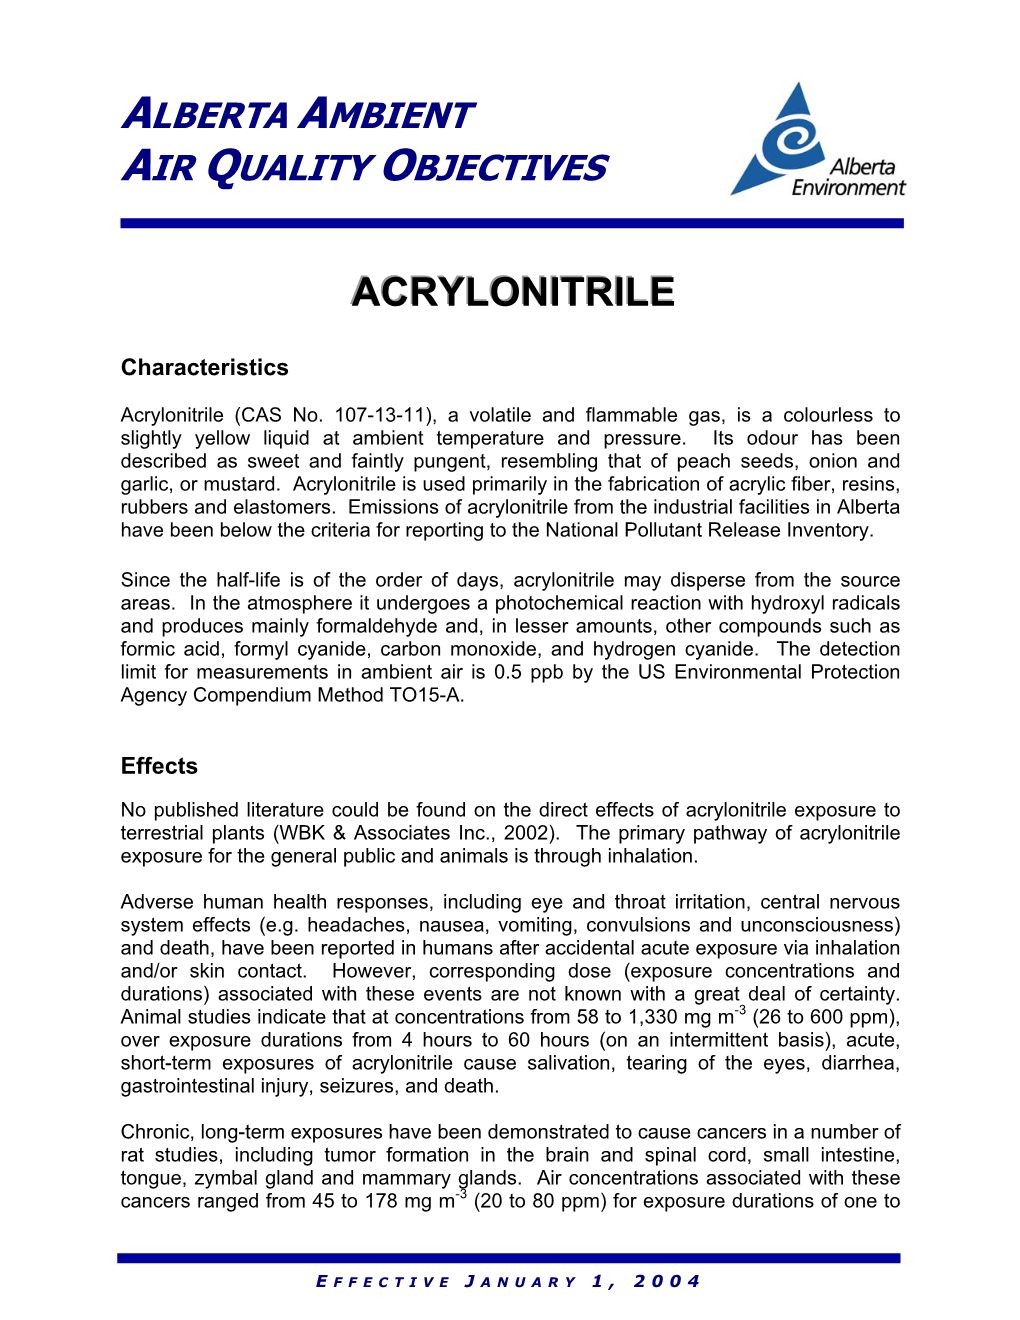 Alberta Ambient Air Quality Objectives: Acrylonitrile